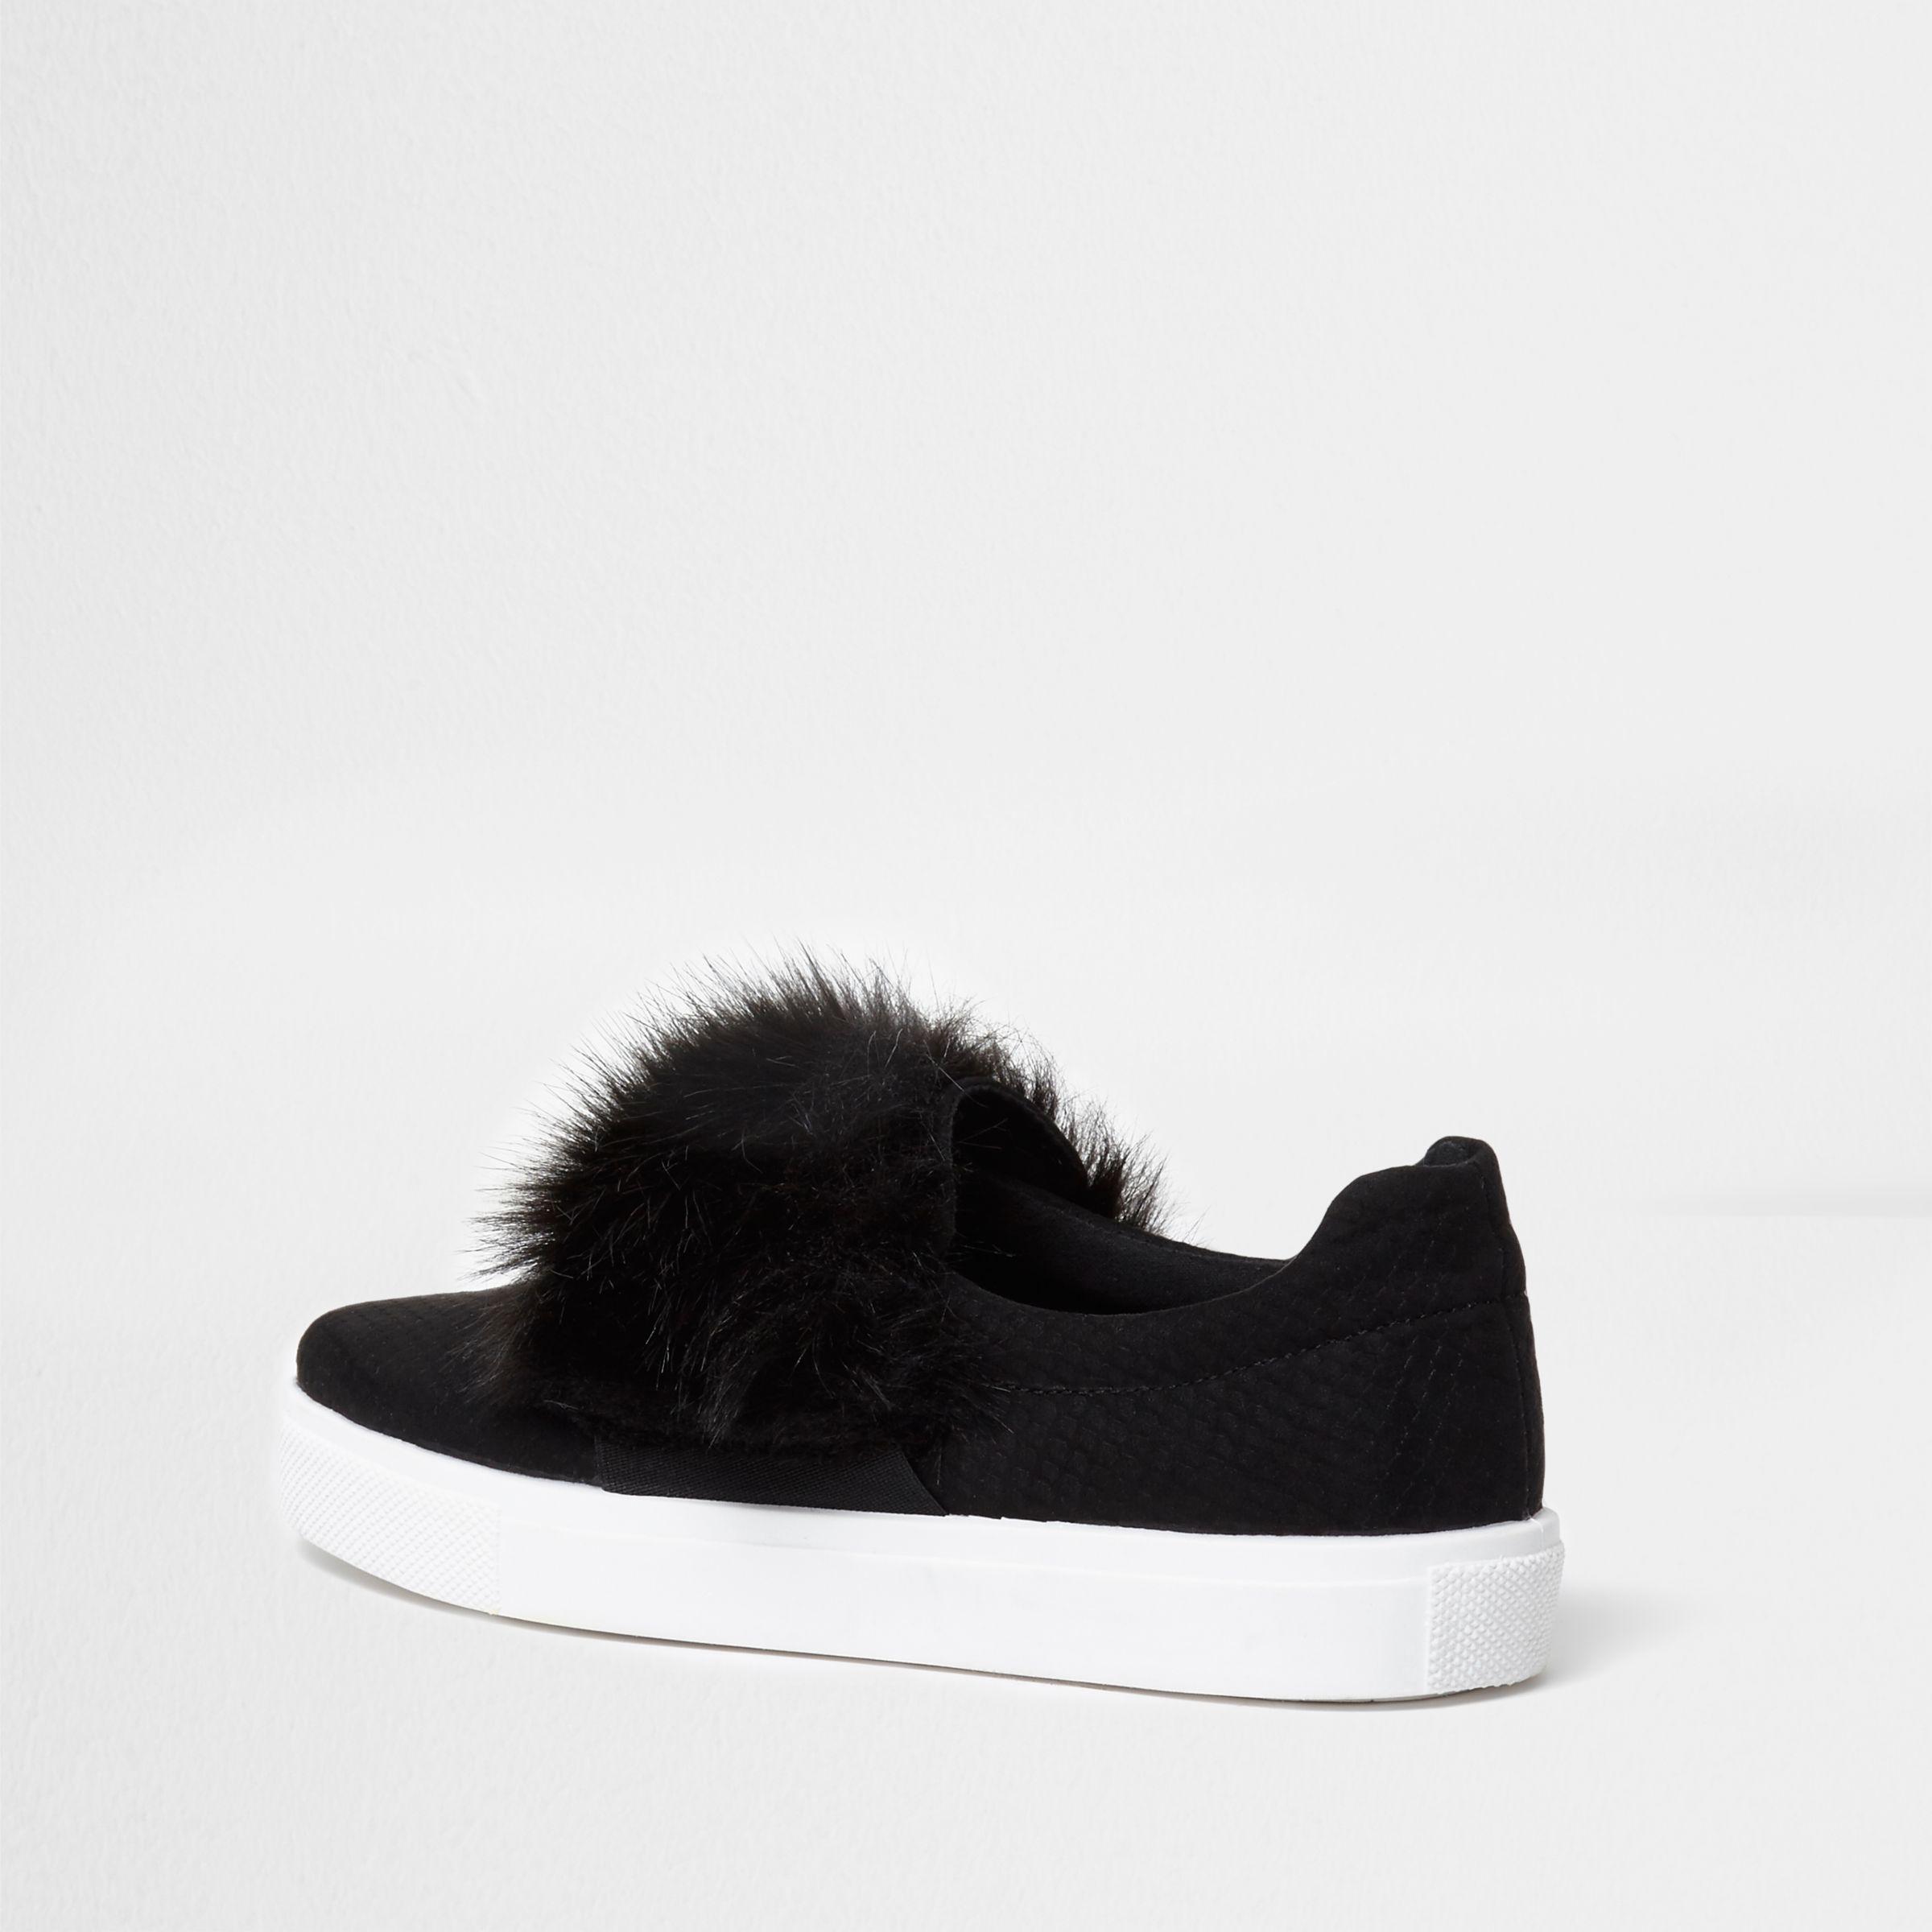 fluffy black shoes